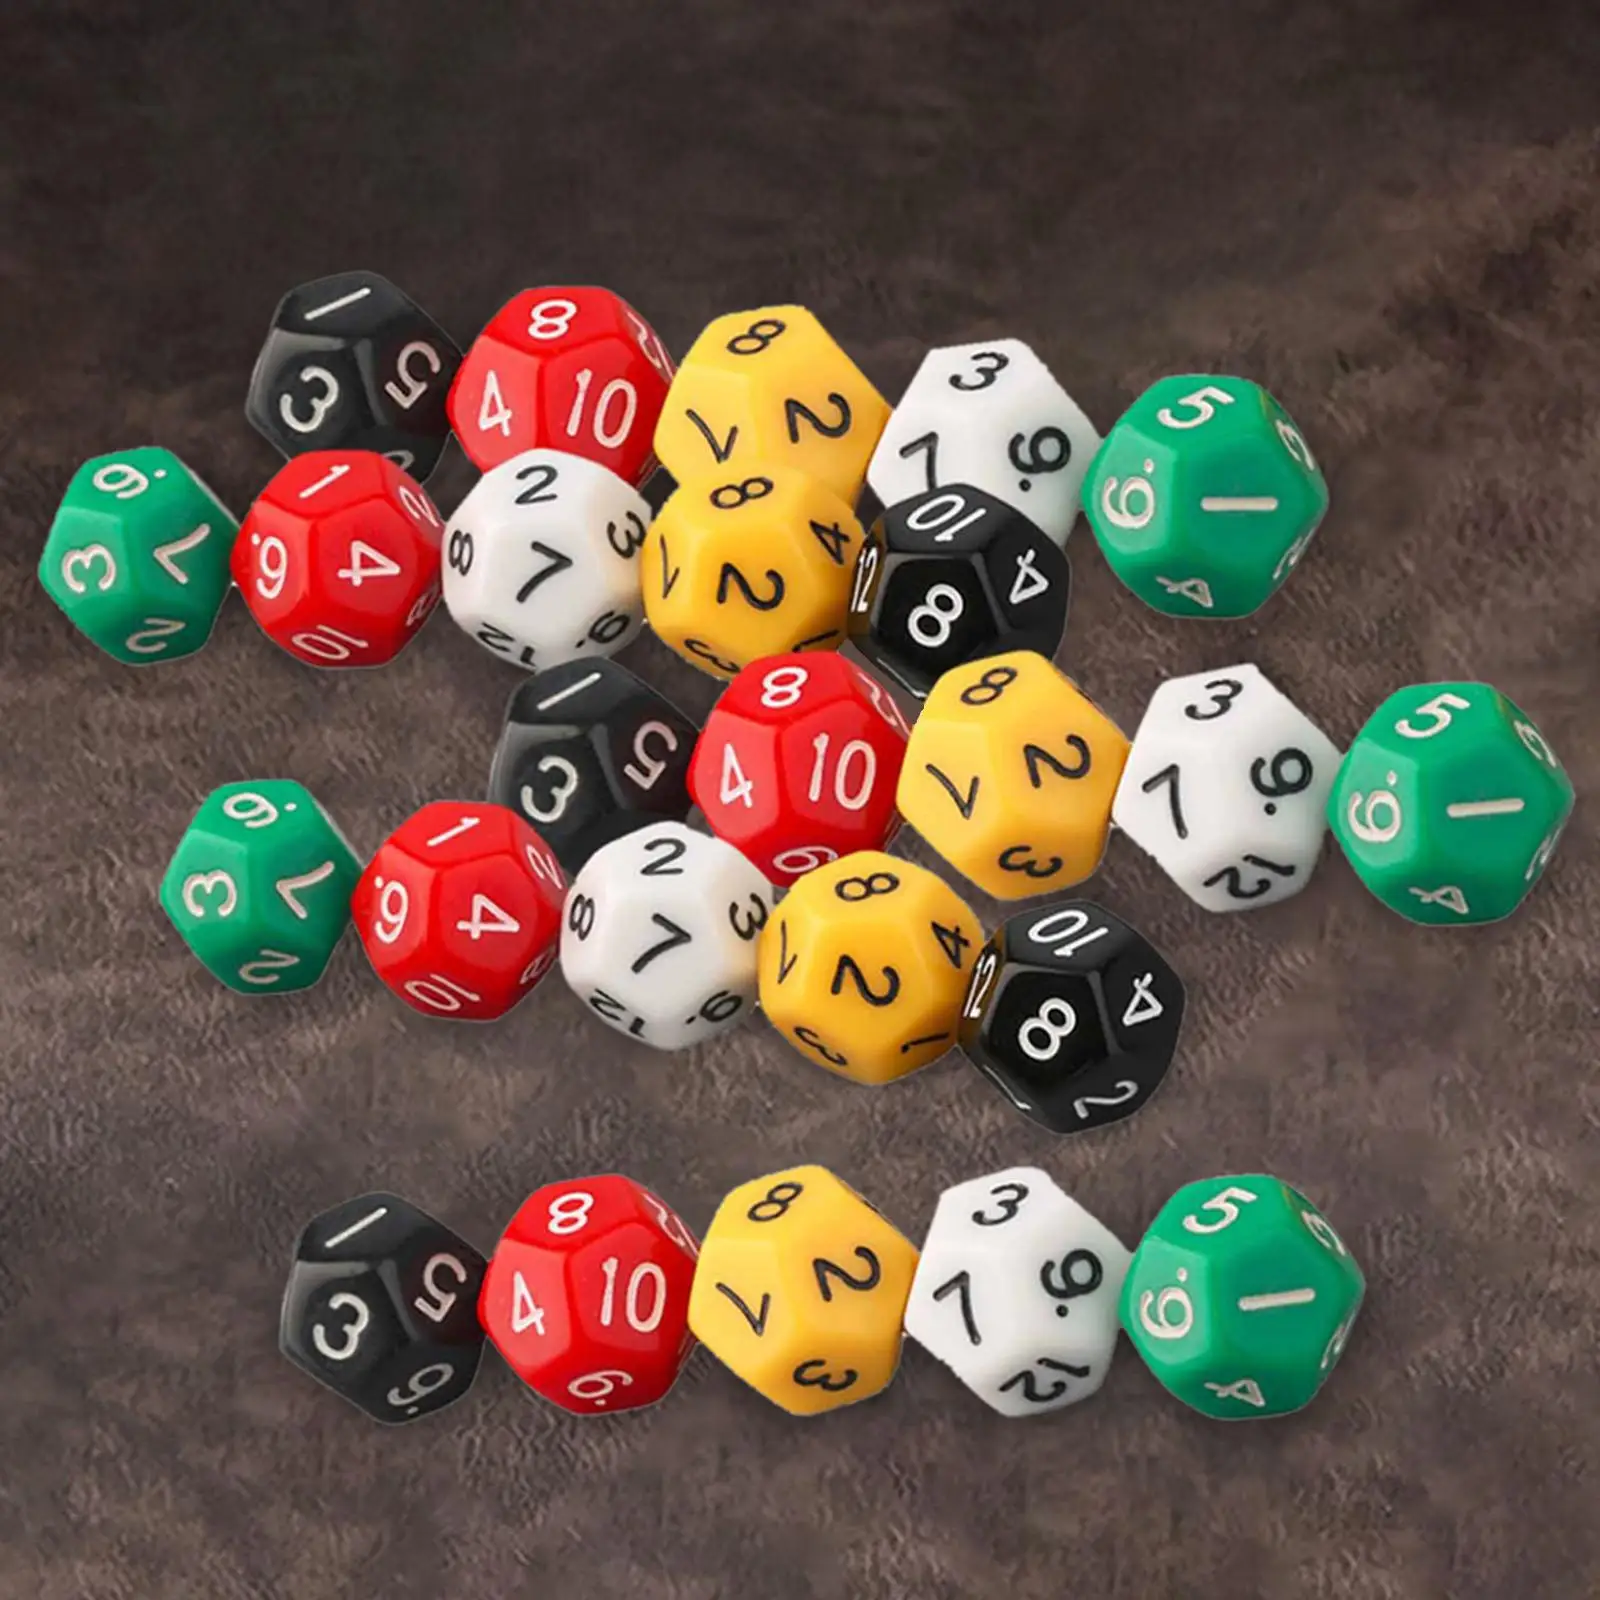 25x Polyhedral Dice Tabletop Game Gift Eaducational Material Multisided Dice